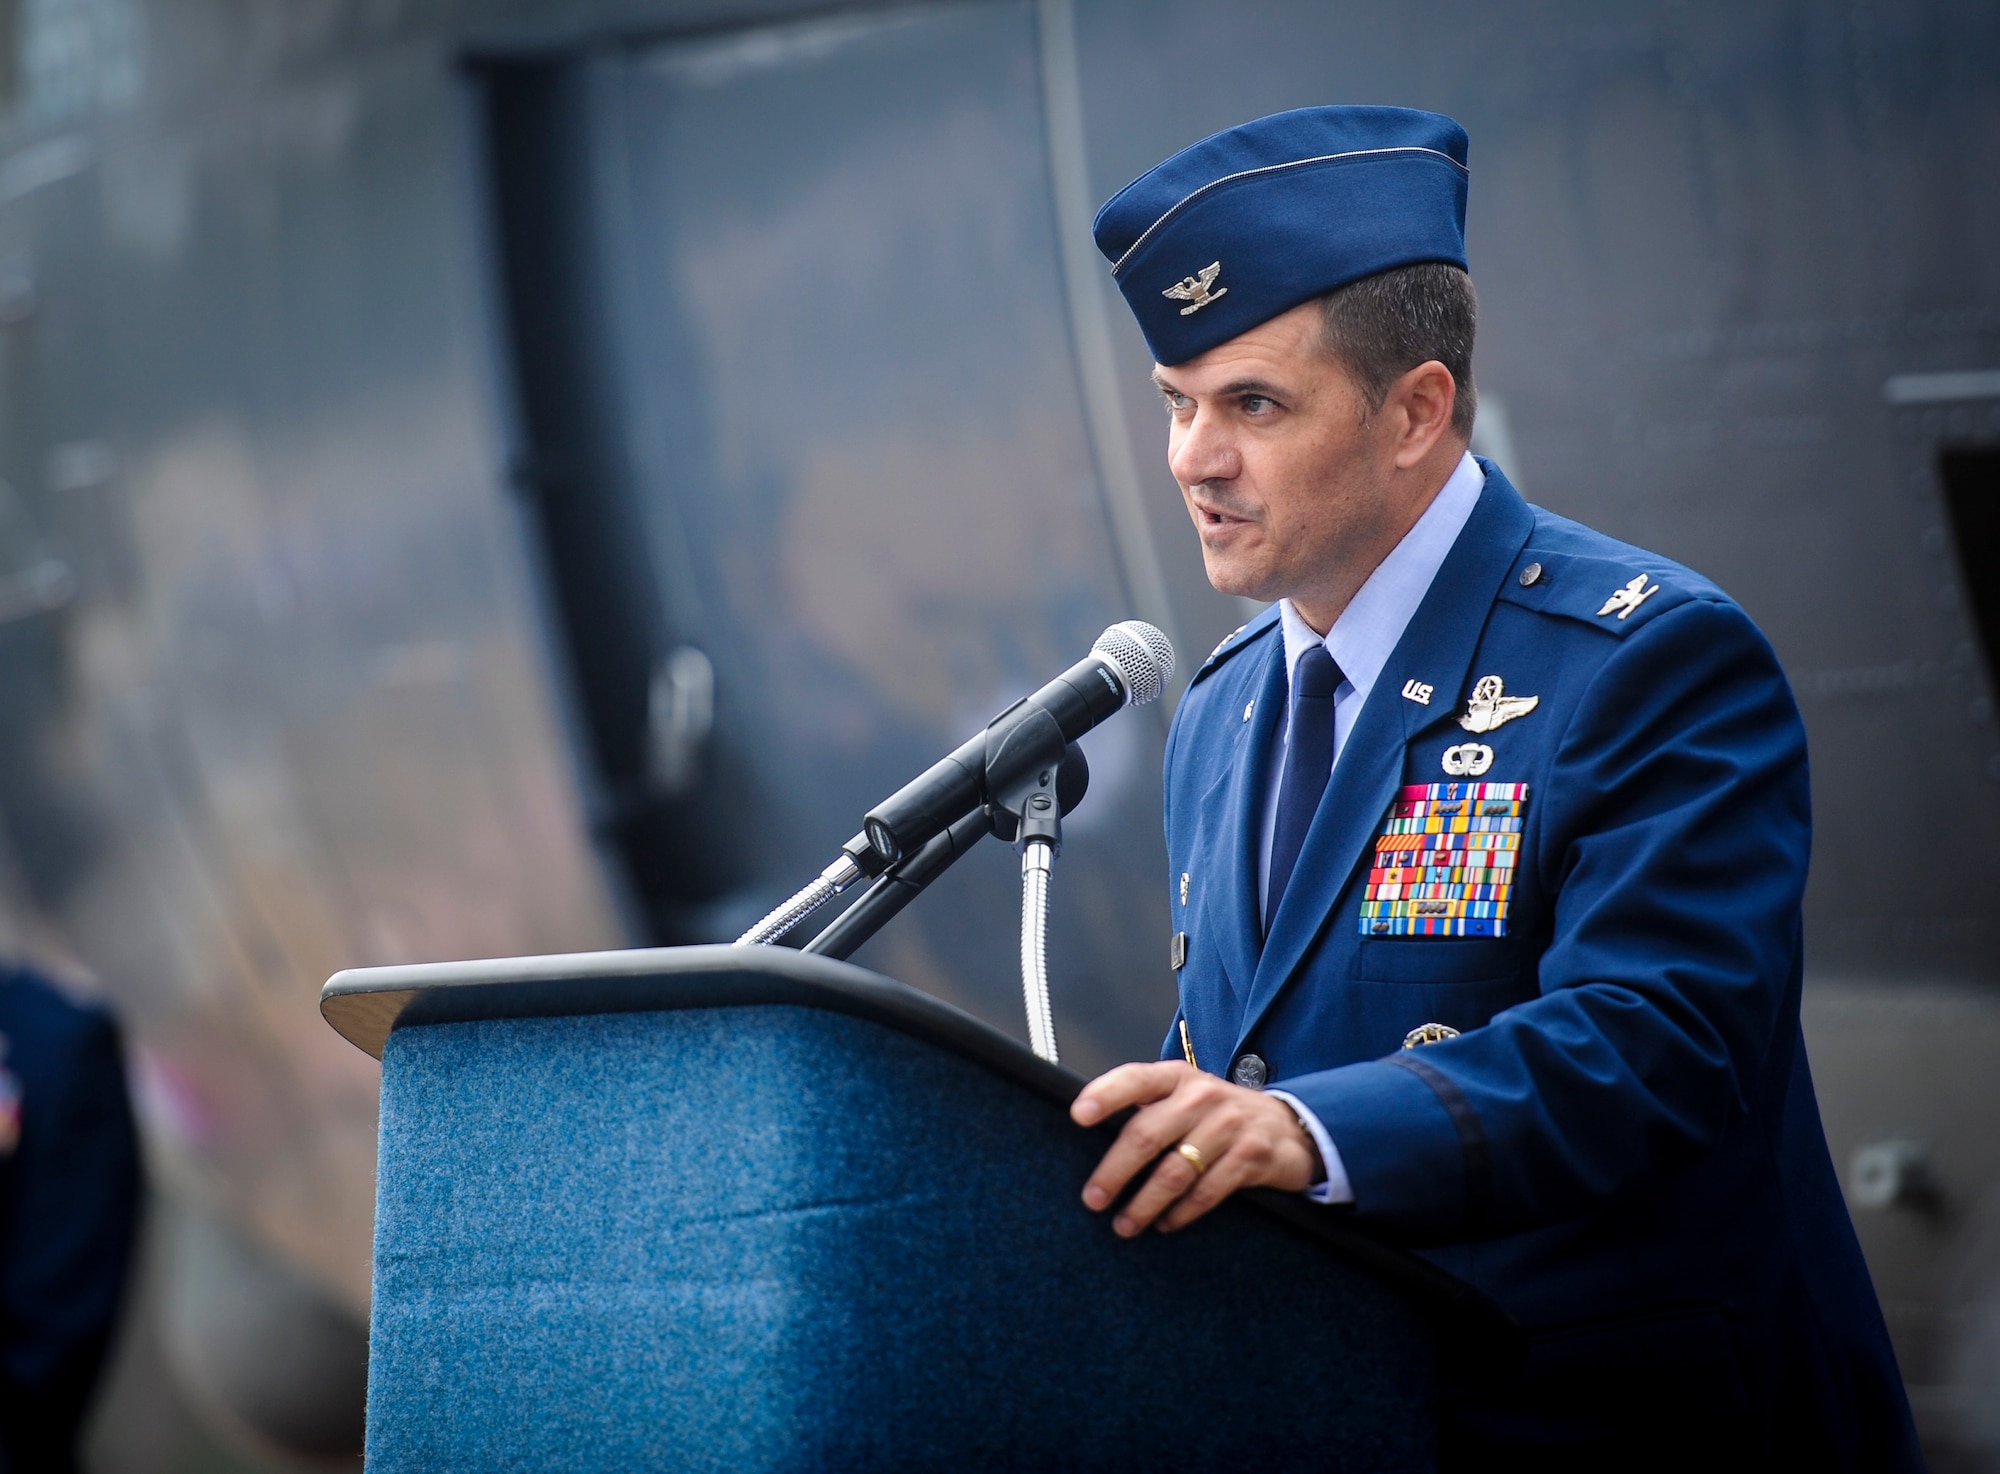 Col. Sean Farrell, commander of the 1st Special Operations Wing, speaks to guests during the AC-130H Spectre dedication ceremony at Hurlburt Field, Fla., Jan. 2, 2016. The Spectre played a role in operations all over the world, first in Vietnam, proceeding into the latter of the 20th century with operations Eagle Claw, Urgent Fury, Just Cause and Desert Storm. The last operational years of the AC-130H Spectre were spent flying combat missions in the Balkans and Somalia, and in Afghanistan in support of Operation Enduring Freedom. (U.S. Air Force photo by Senior Airman Meagan Schutter)